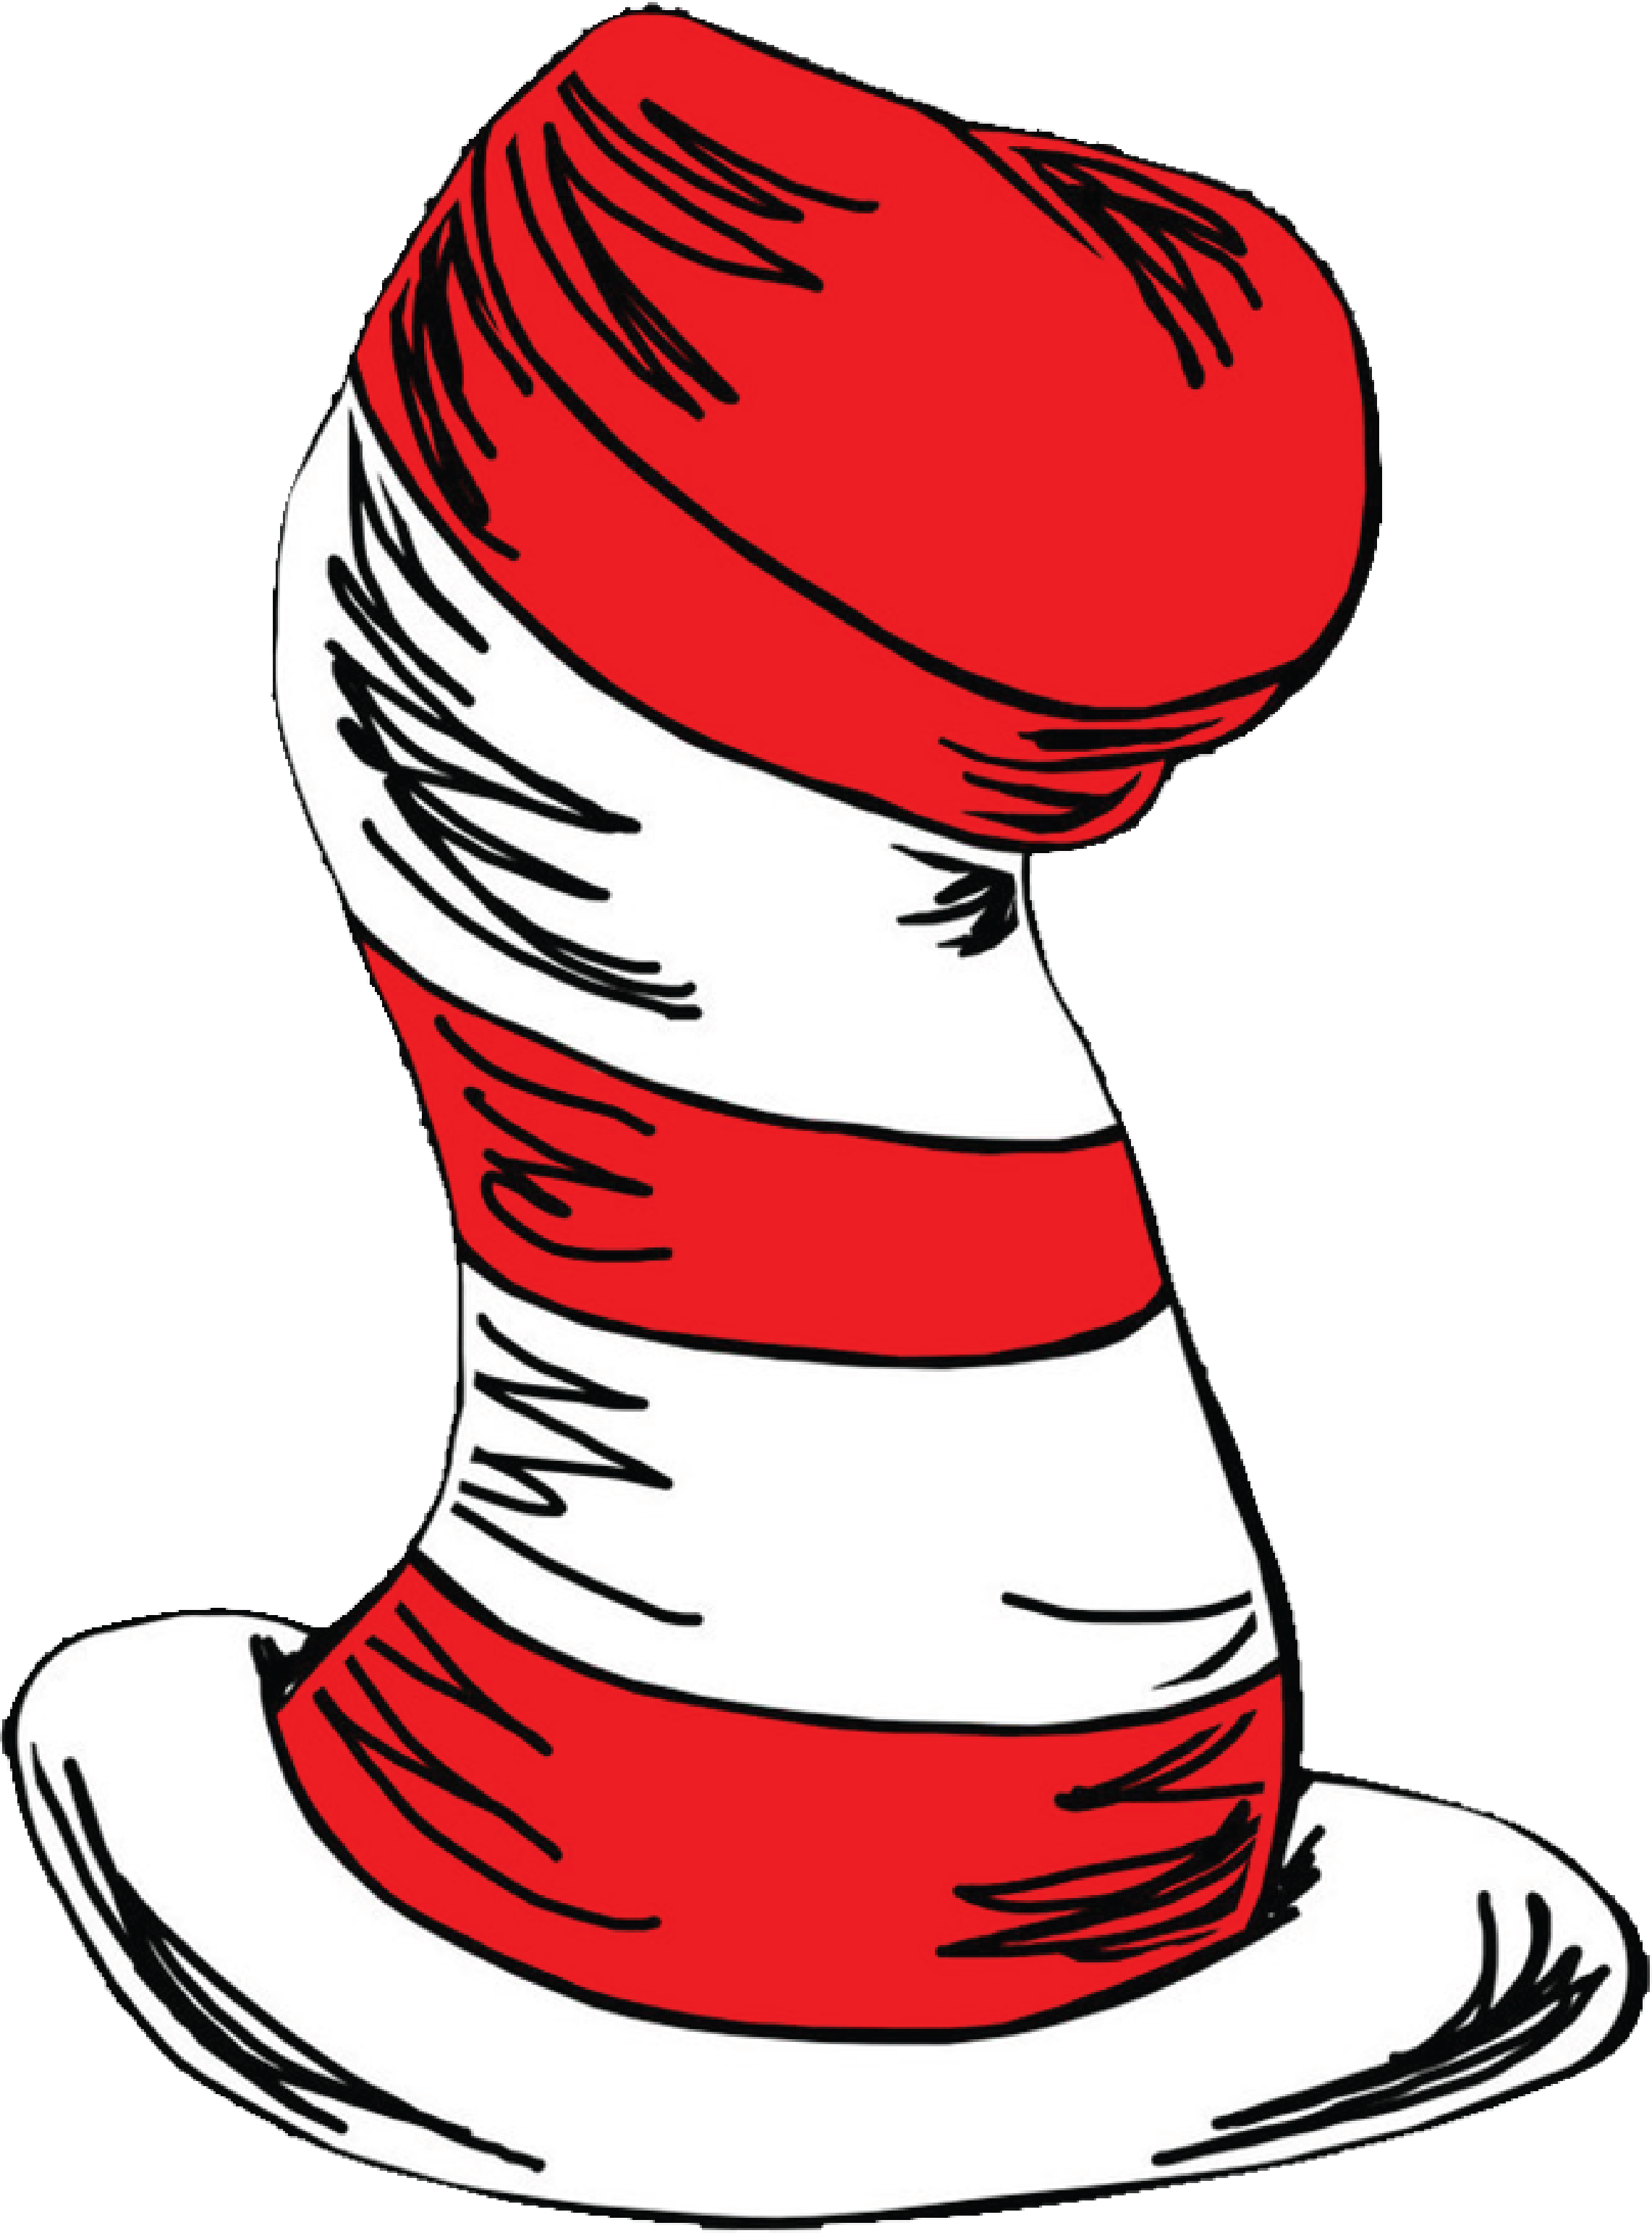 The Cat in the Hat Green Eggs and Ham Clip art dr seuss png download